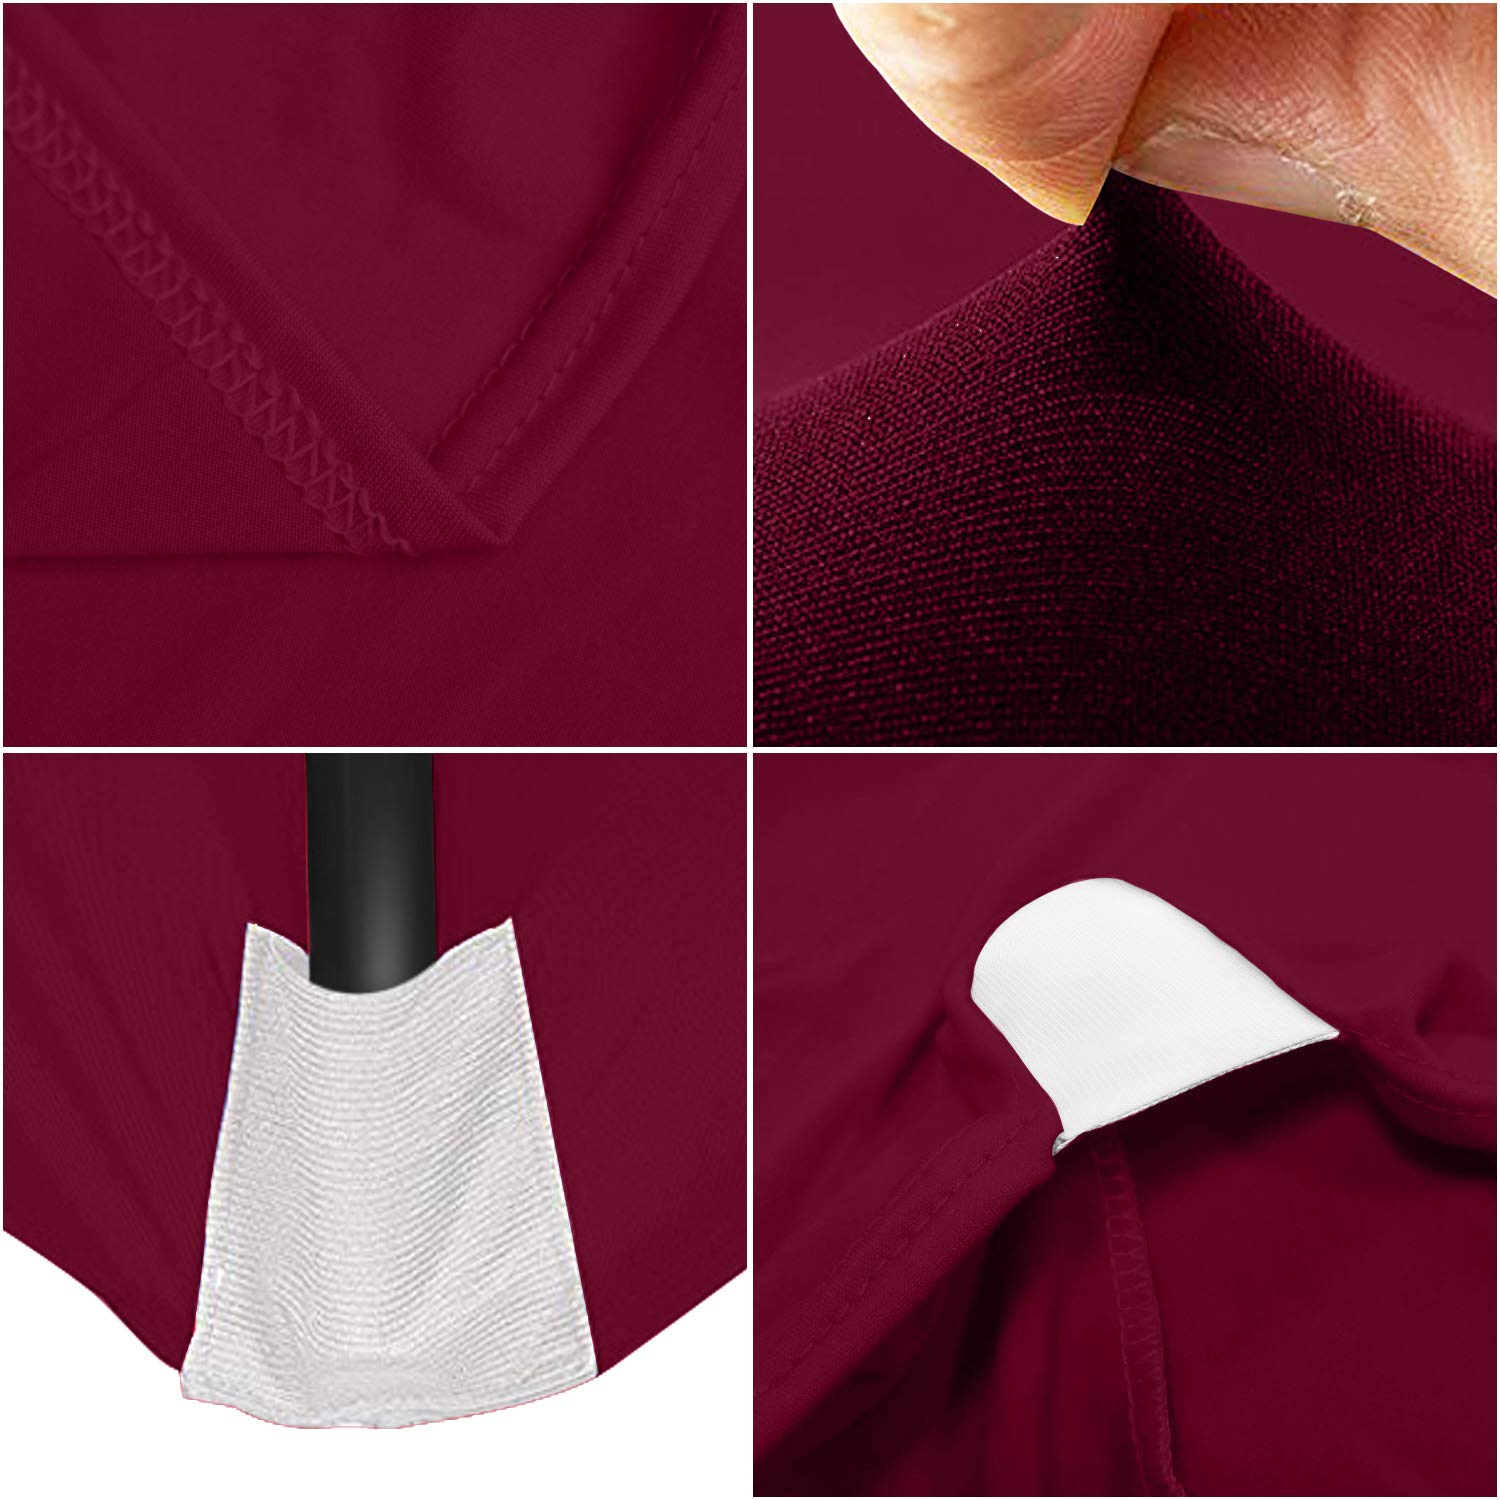 ABCCANOPY Spandex Tablecloths for 4 ft Home Rectangular Table Fitted Stretch Table Cover Polyester Tablecover Lash Bed Cover Table Toppers Massage Table Cover, Burgundy